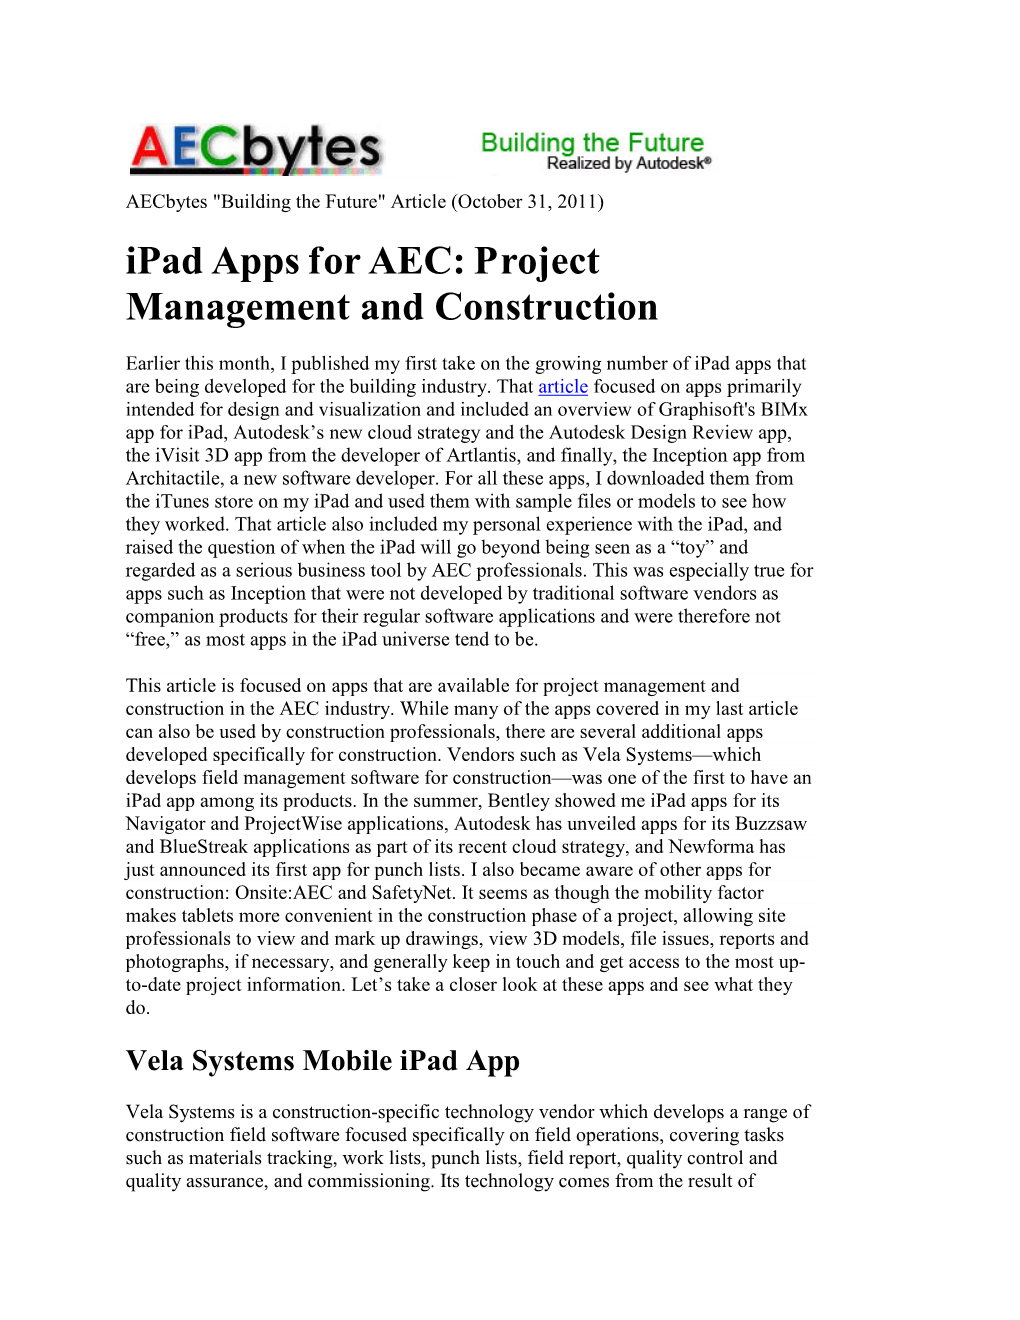 Ipad Apps for AEC: Project Management and Construction